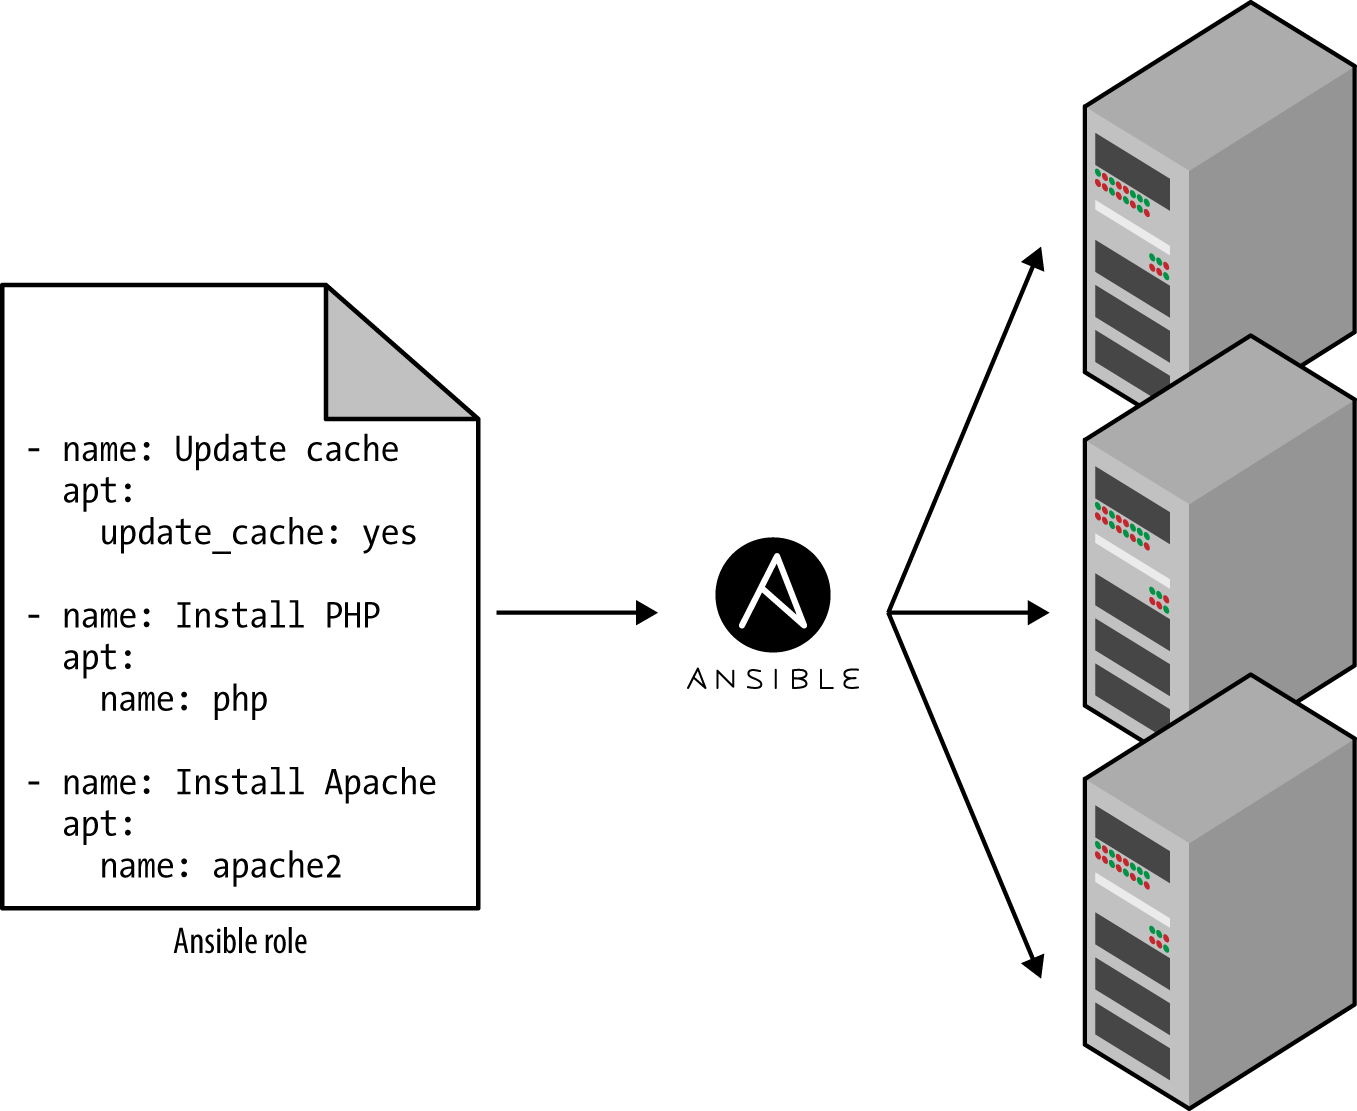 A configuration management tool like Ansible can execute your code across a large number of servers